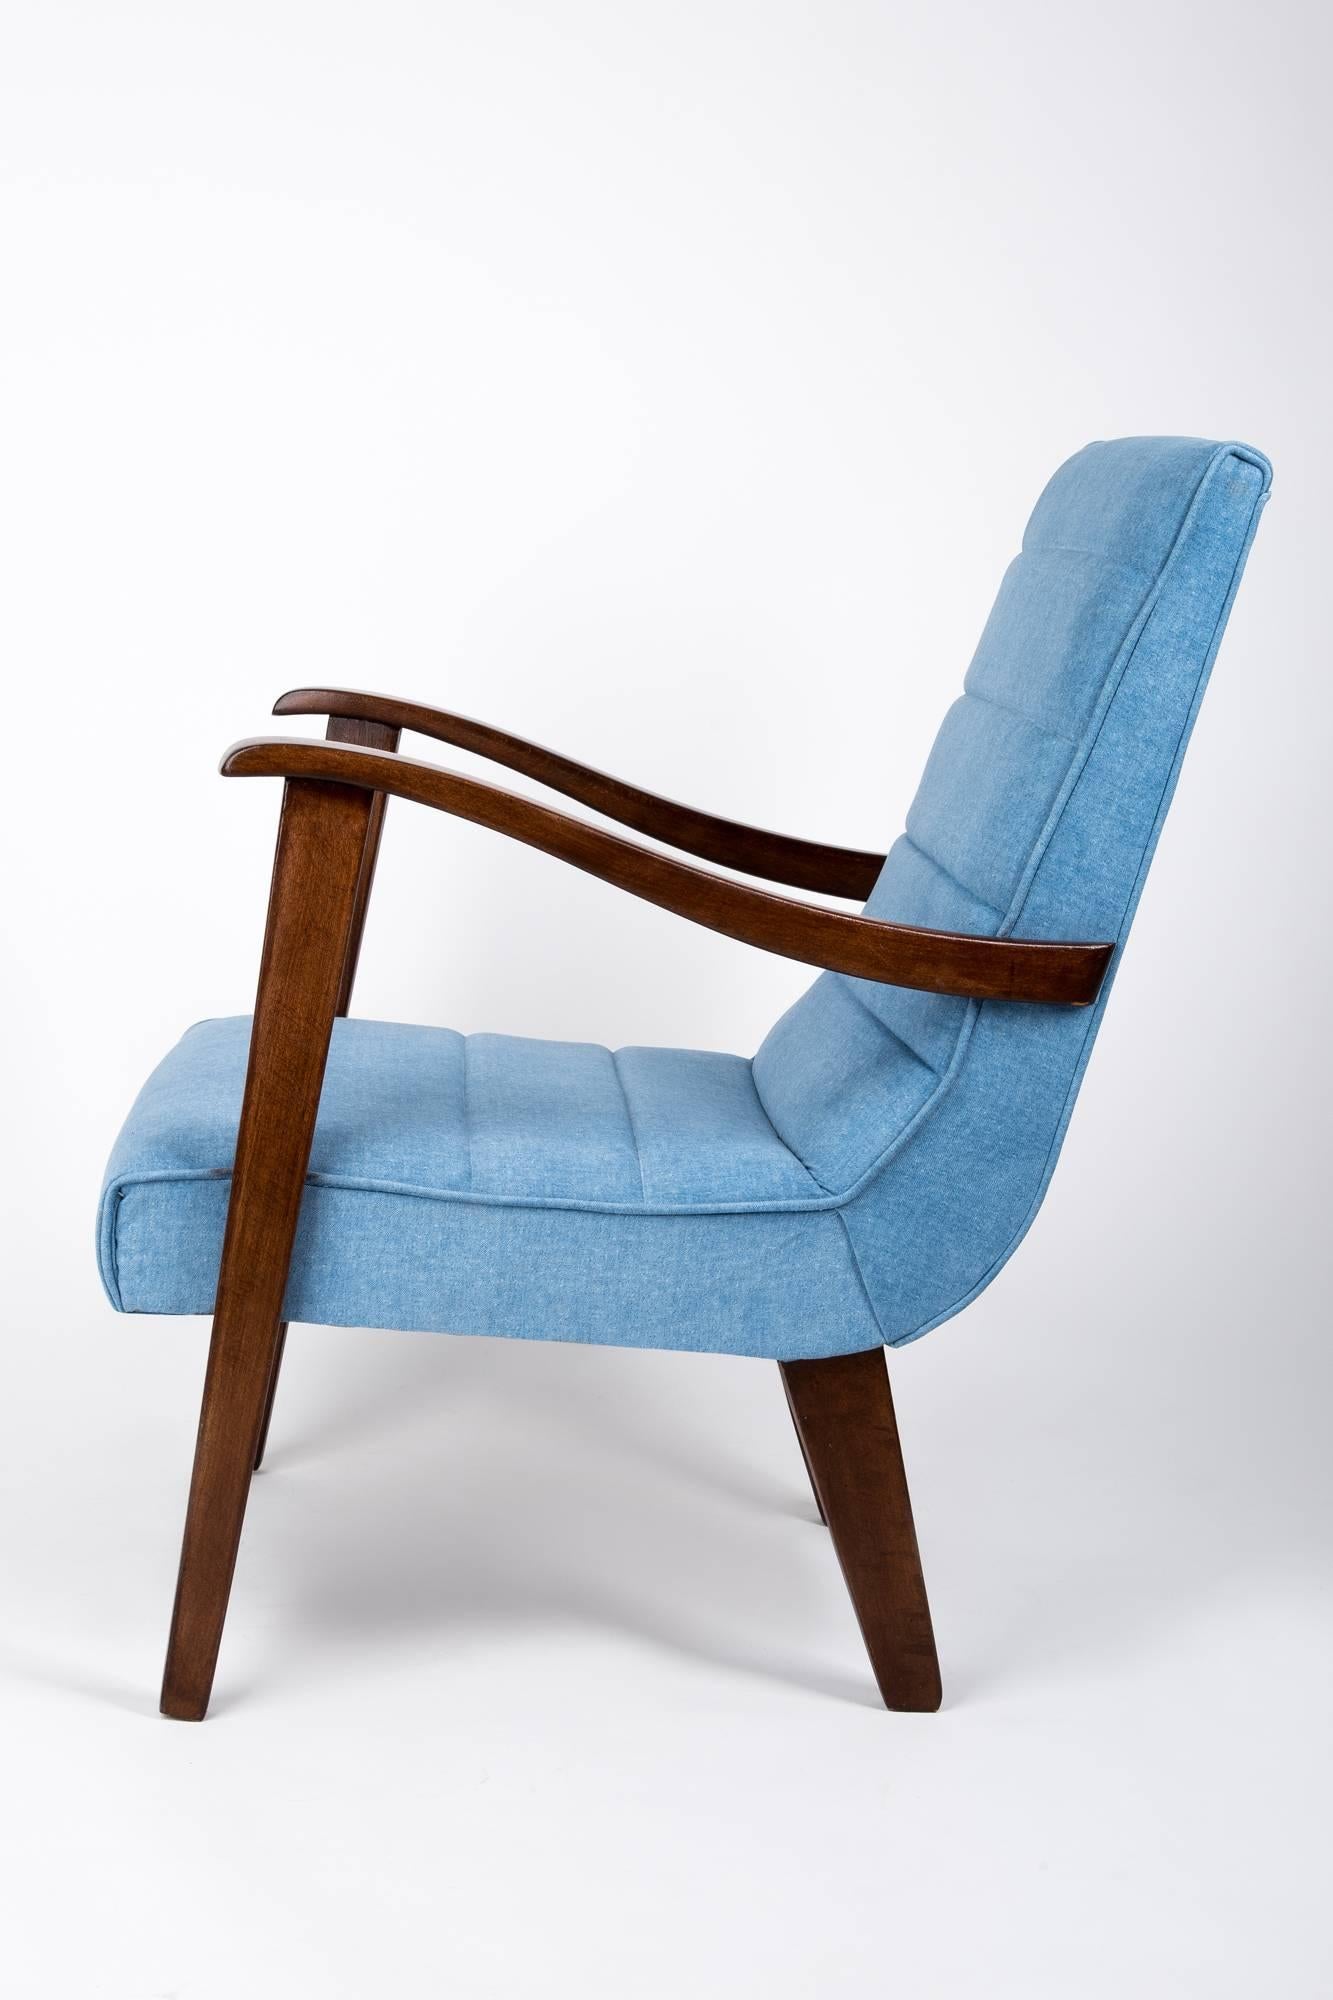 20th Century Set of Two Mid-Century Modern Blue Armchairs by Prudnik Factory, 1960s, Poland For Sale